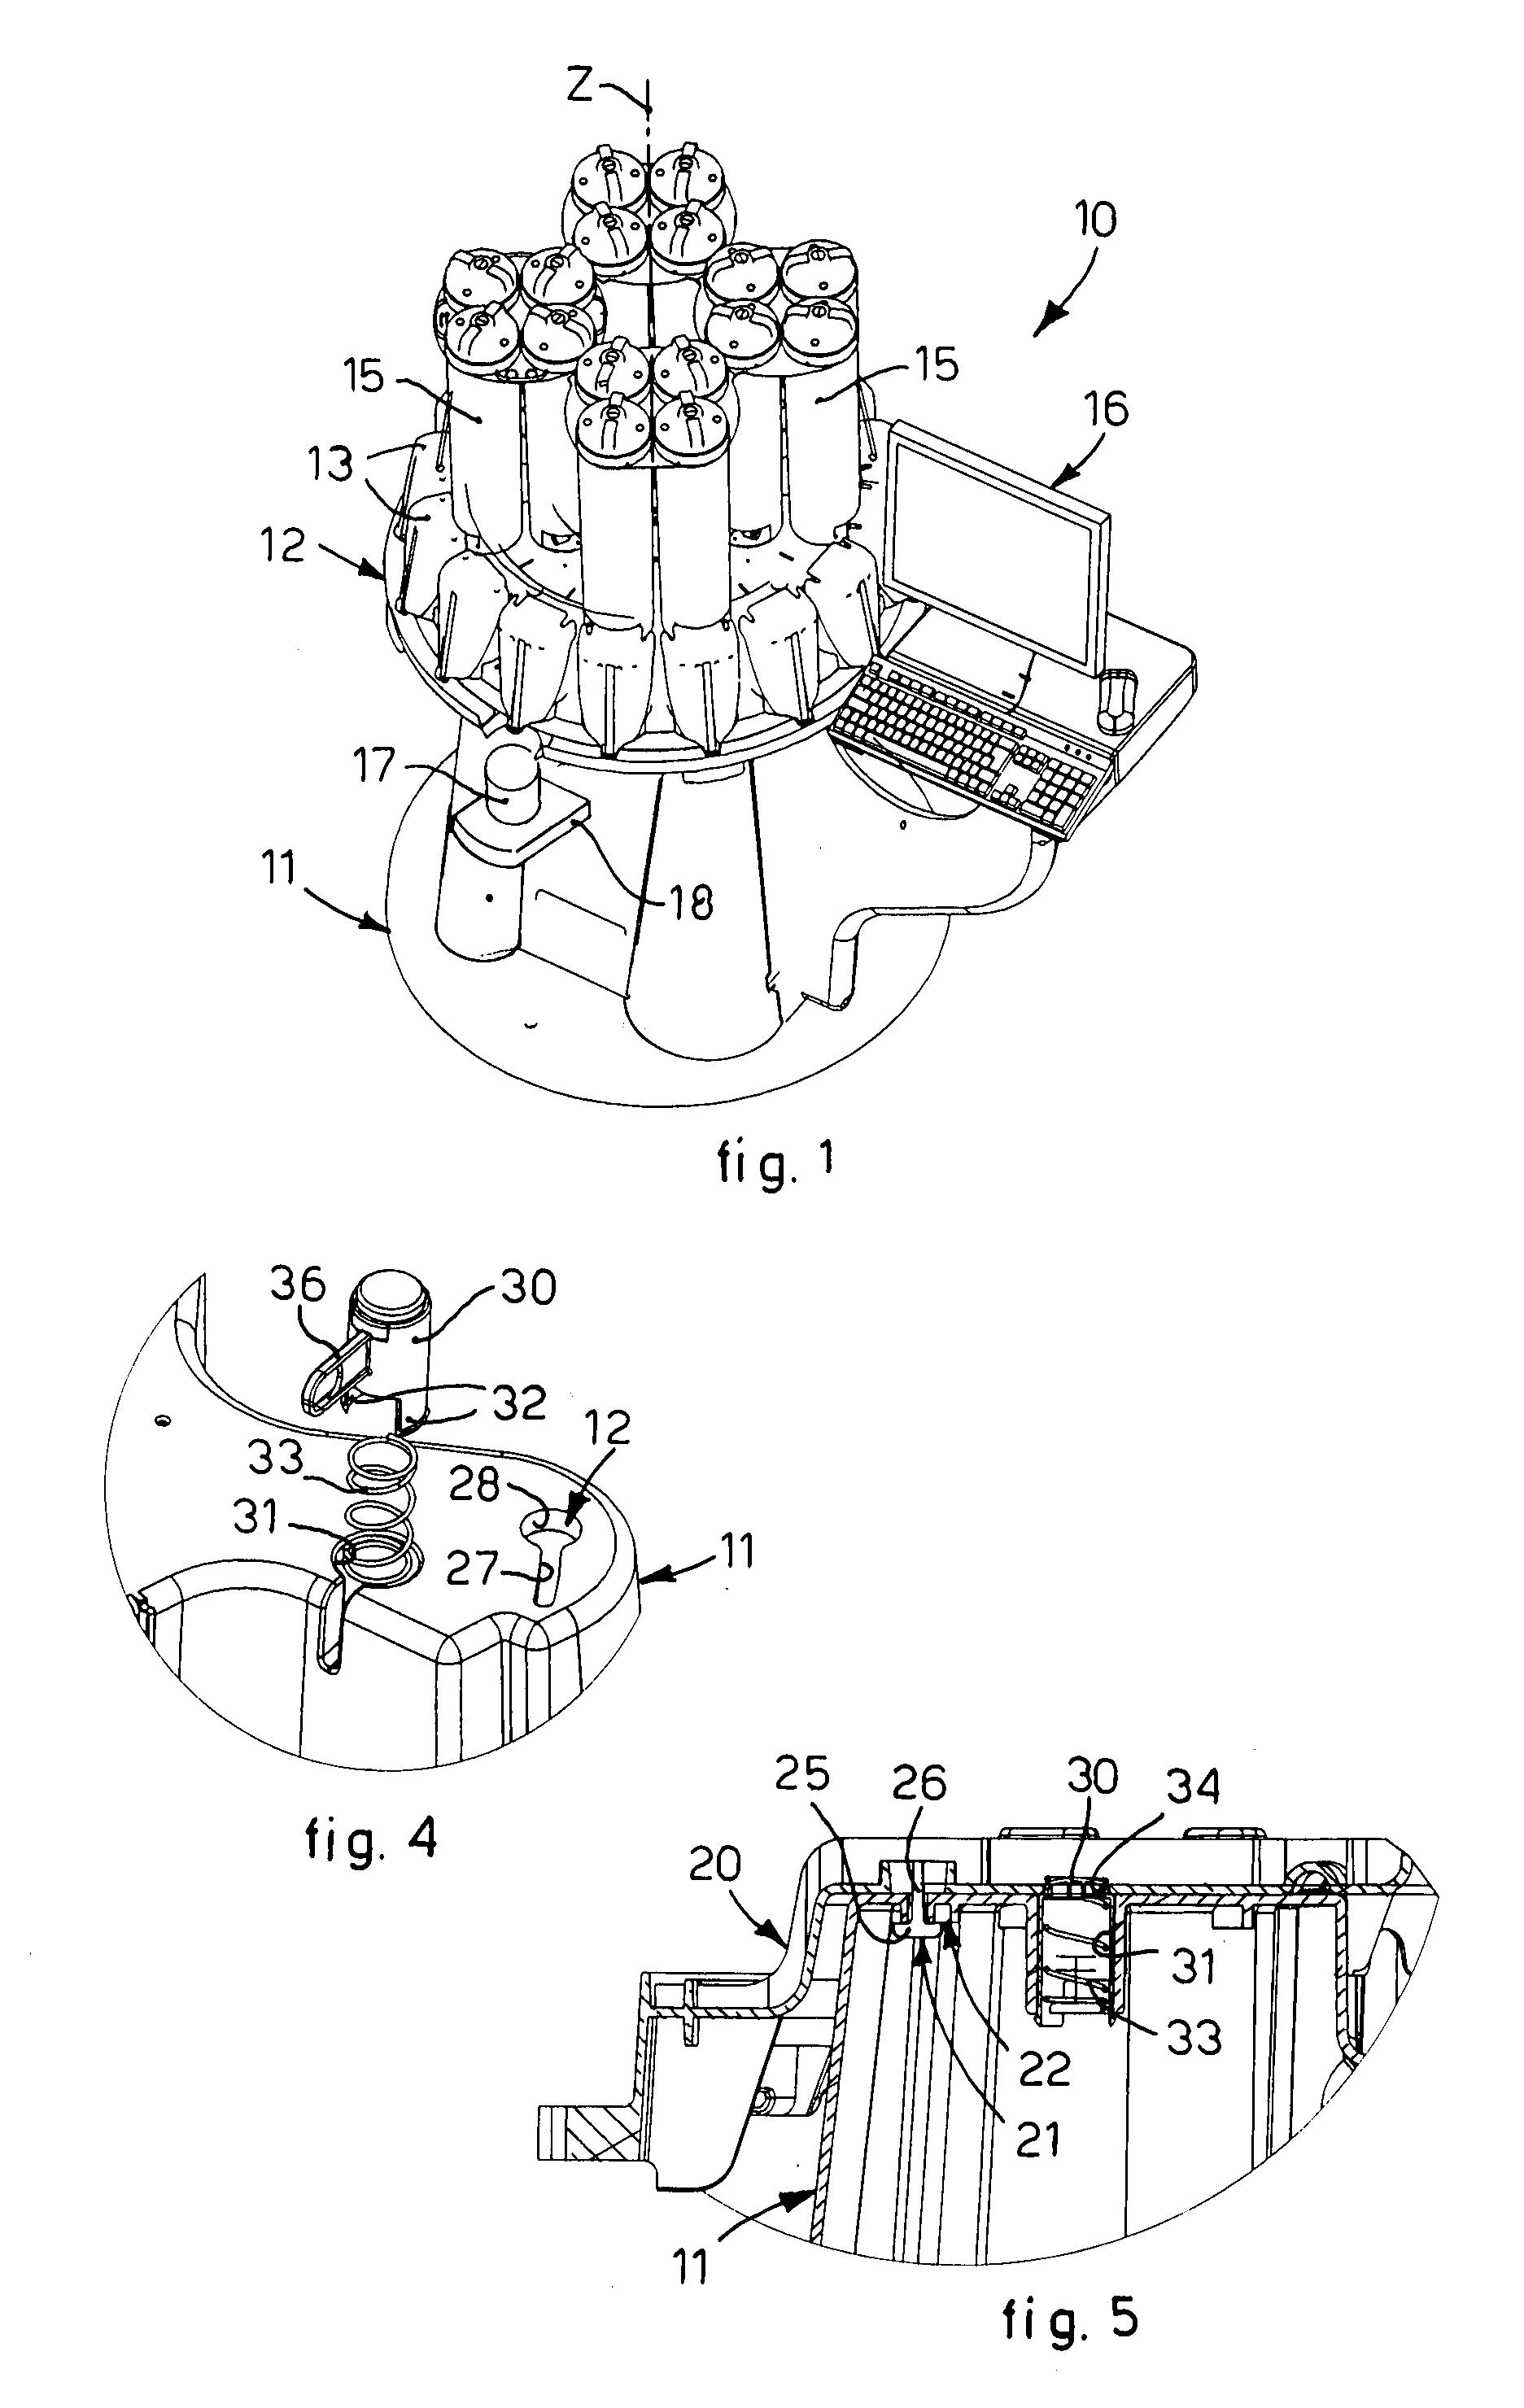 Apparatus for the delivery of fluid products